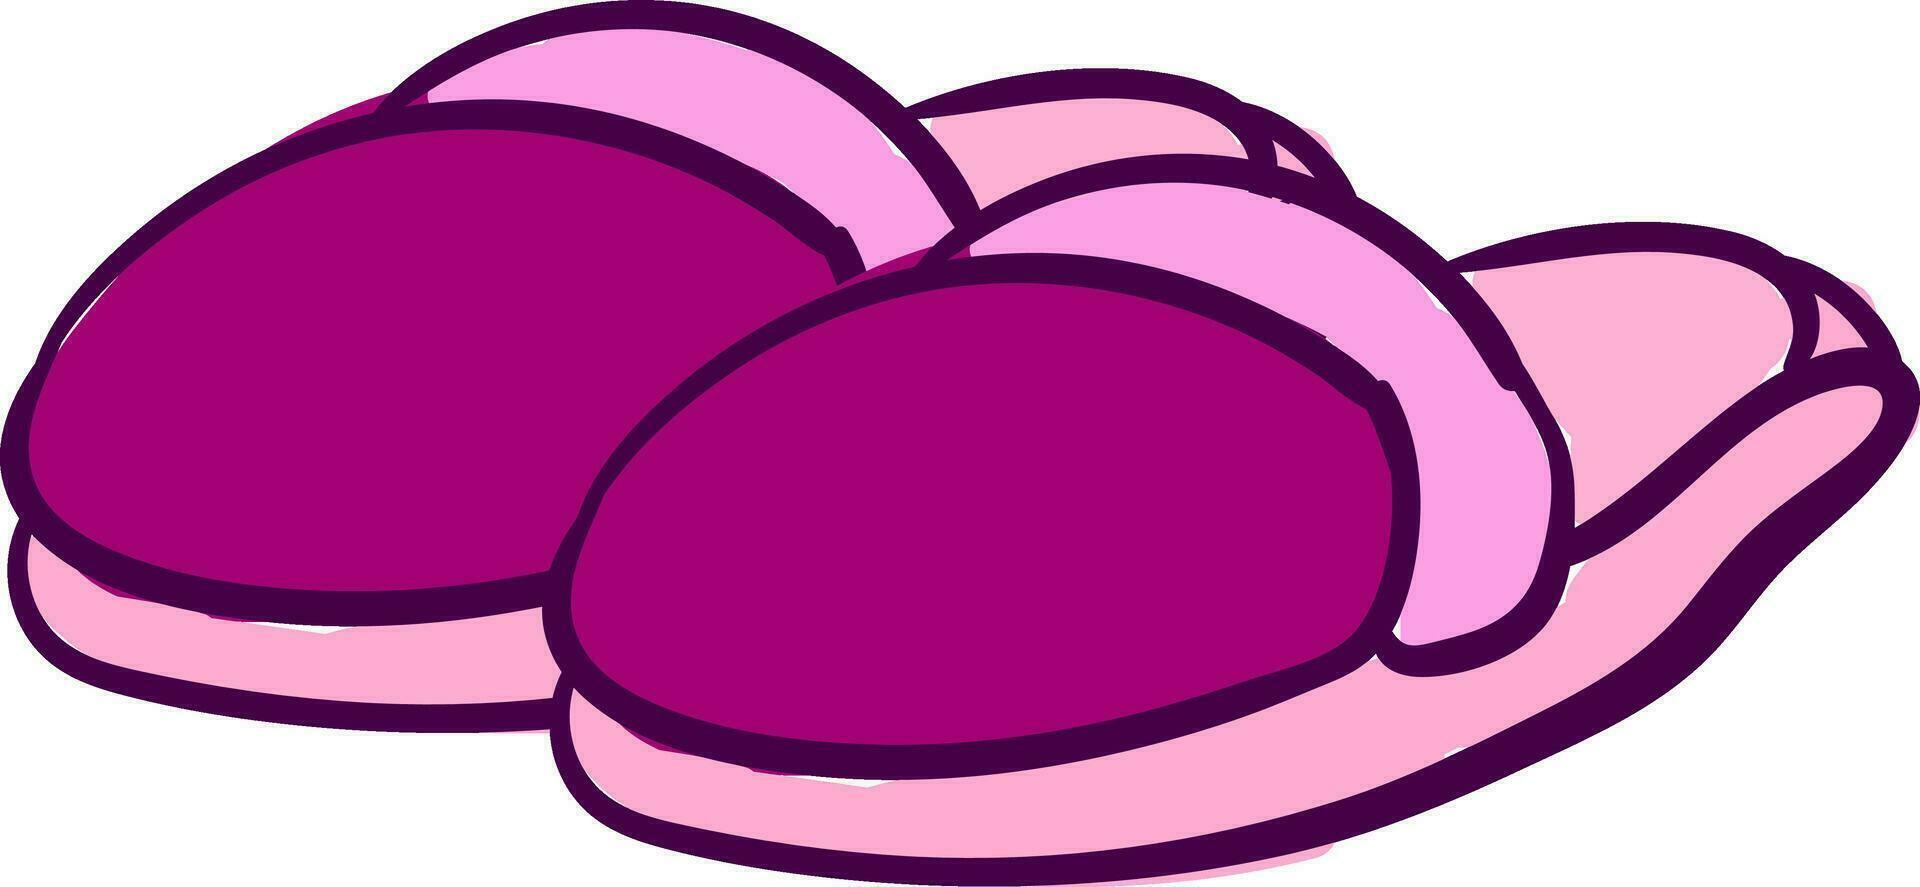 Home pink slippers, vector or color illustration.